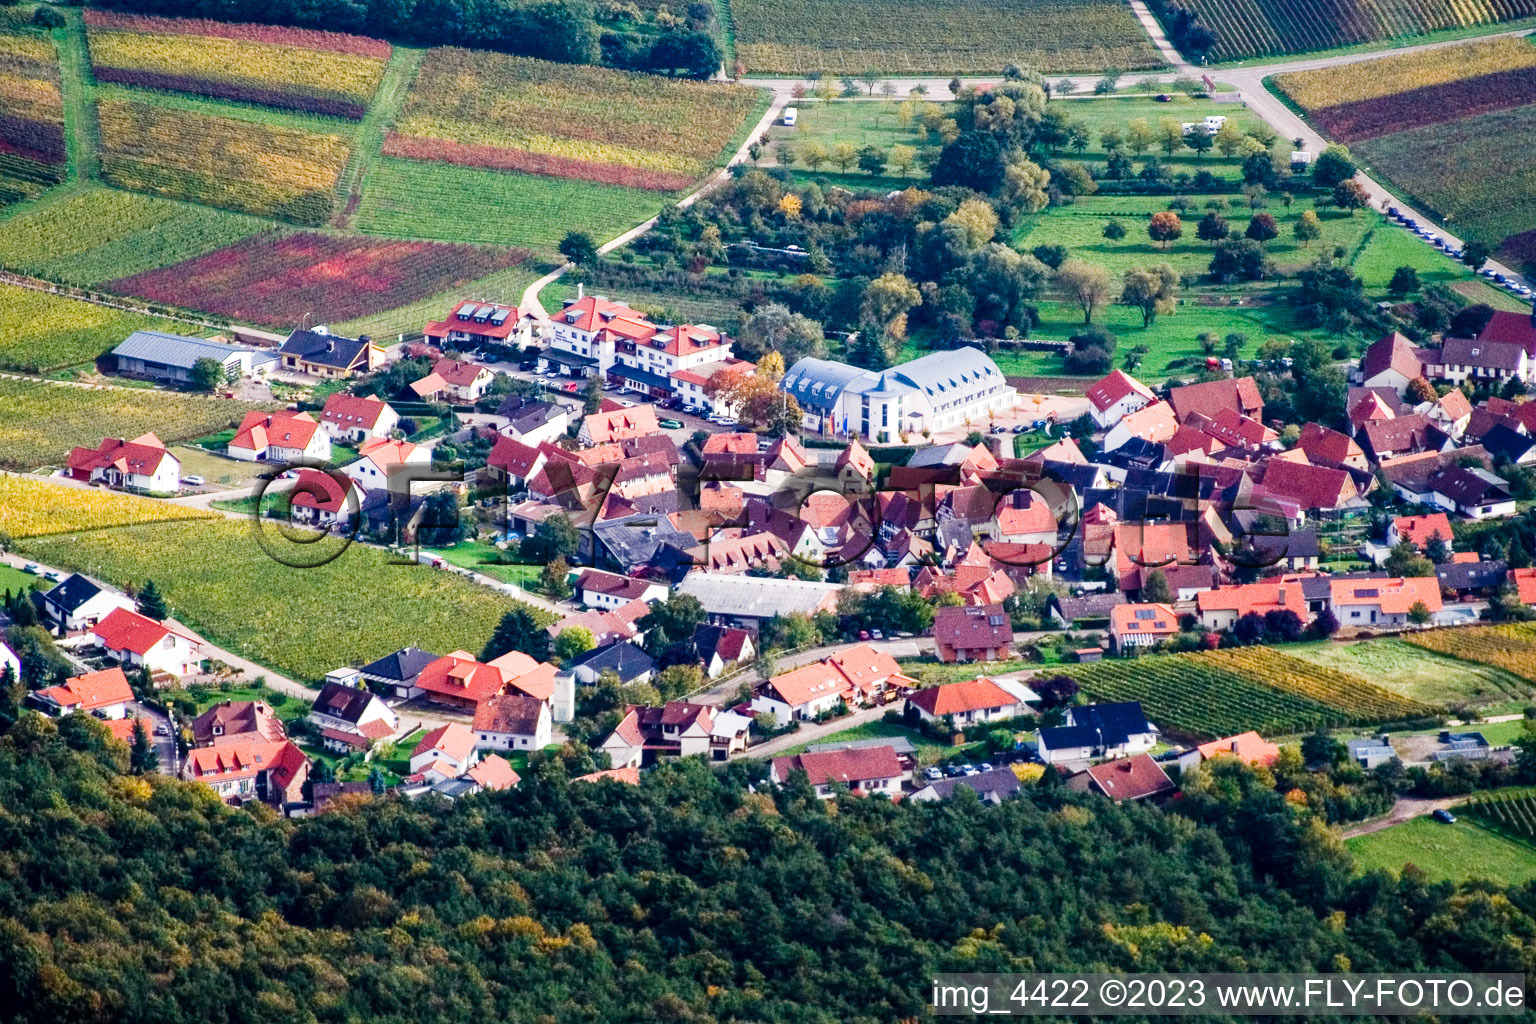 Aerial view of From the west in Klingenmünster in the state Rhineland-Palatinate, Germany